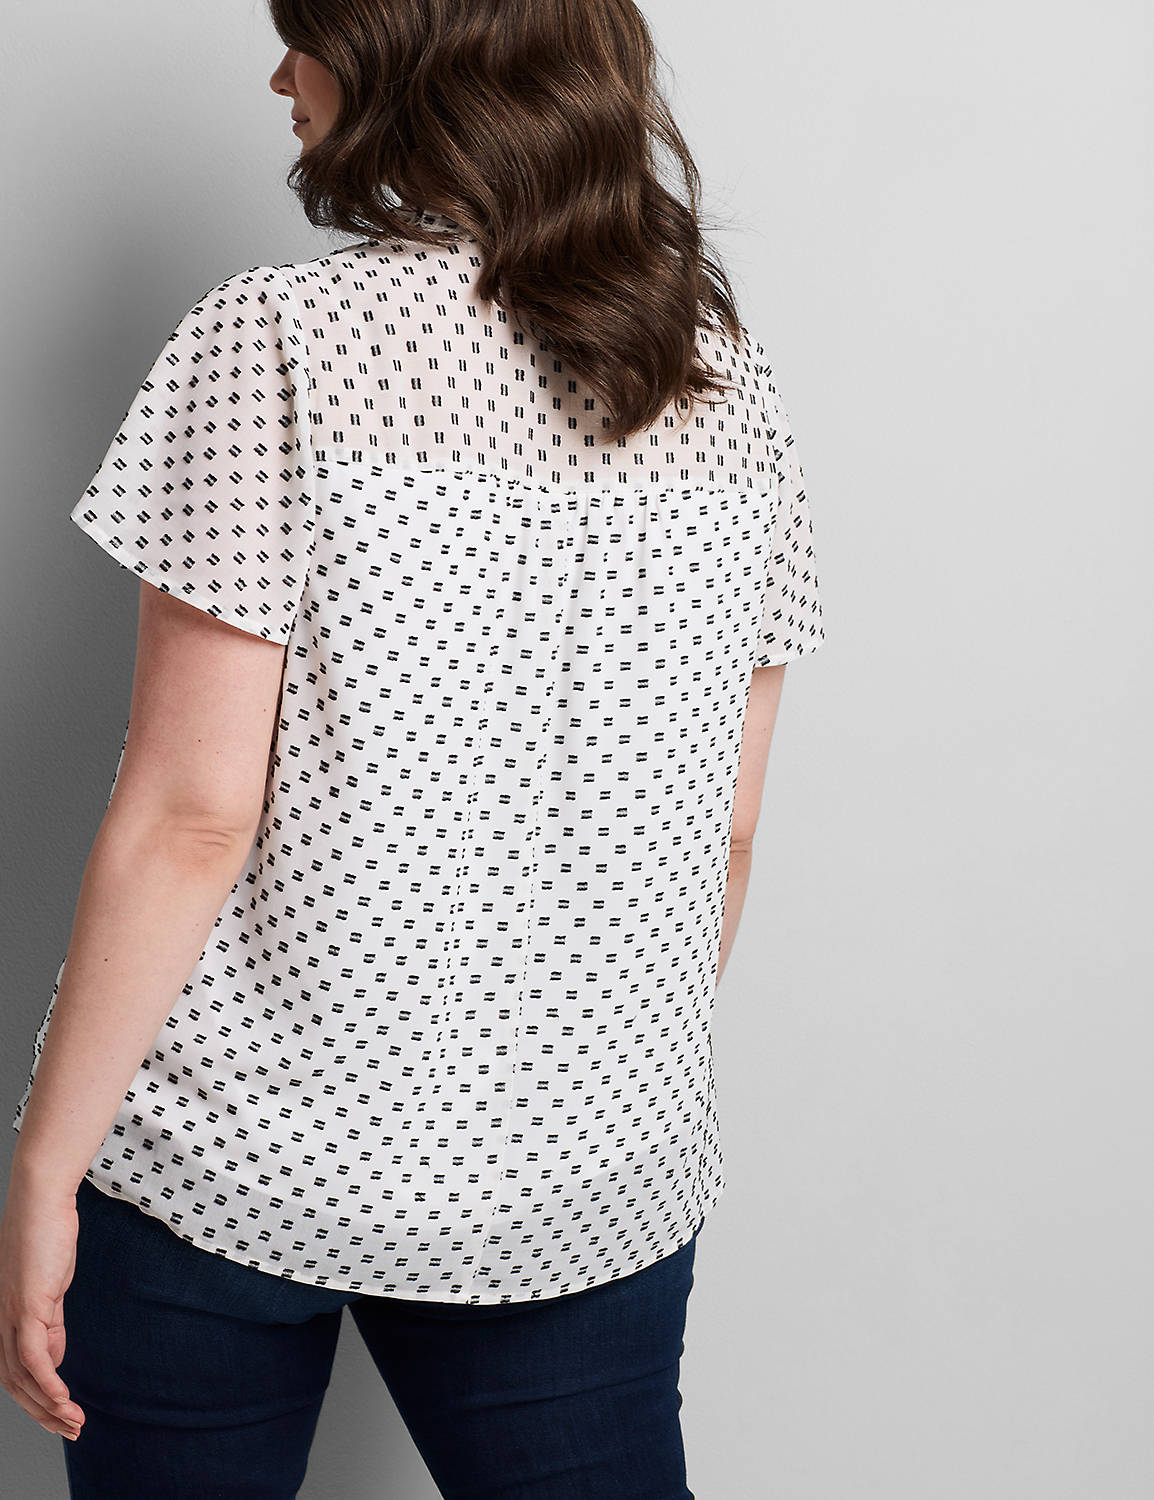 Short Sleeve Flutter Vneck with Ties Clip Dot Top 1114201:Ivory Rose CSI 1200318:12 Product Image 2